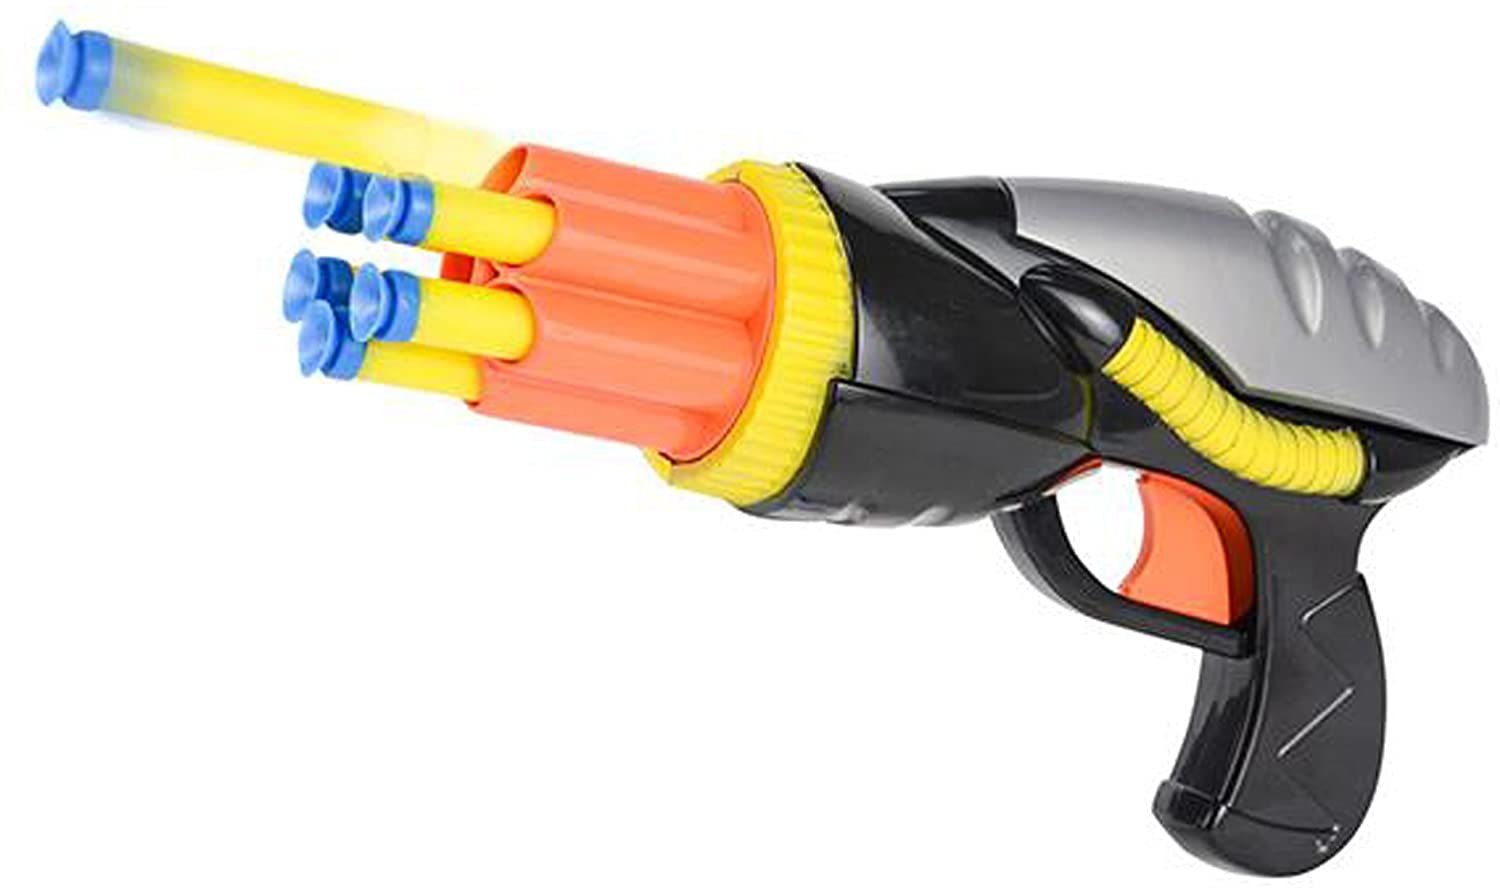 ArtCreativity 10 Inch Missile Launcher Toy Gun for Kids with 6 Suction Cup Darts, Futuristic Space Blaster Air Dart Pistol, Sturdy Plastic Design - Great Gift Idea for Boys and Girls